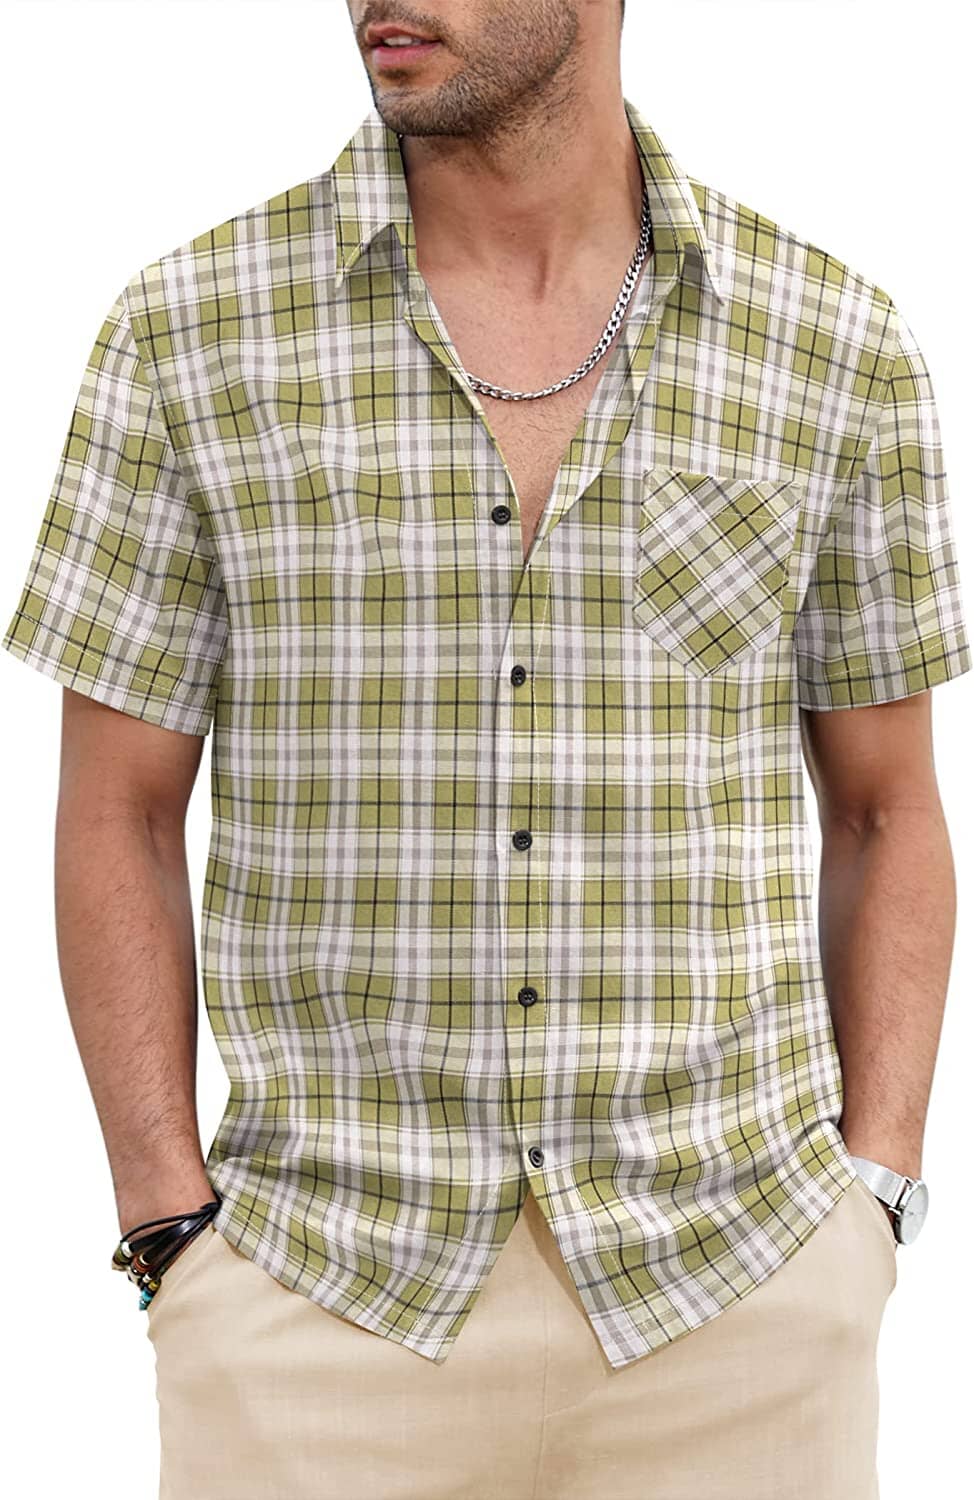 Classic Short Sleeve Plaid Cotton Shirts with Pocket (US Only) Shirts COOFANDY Store Khaki S 